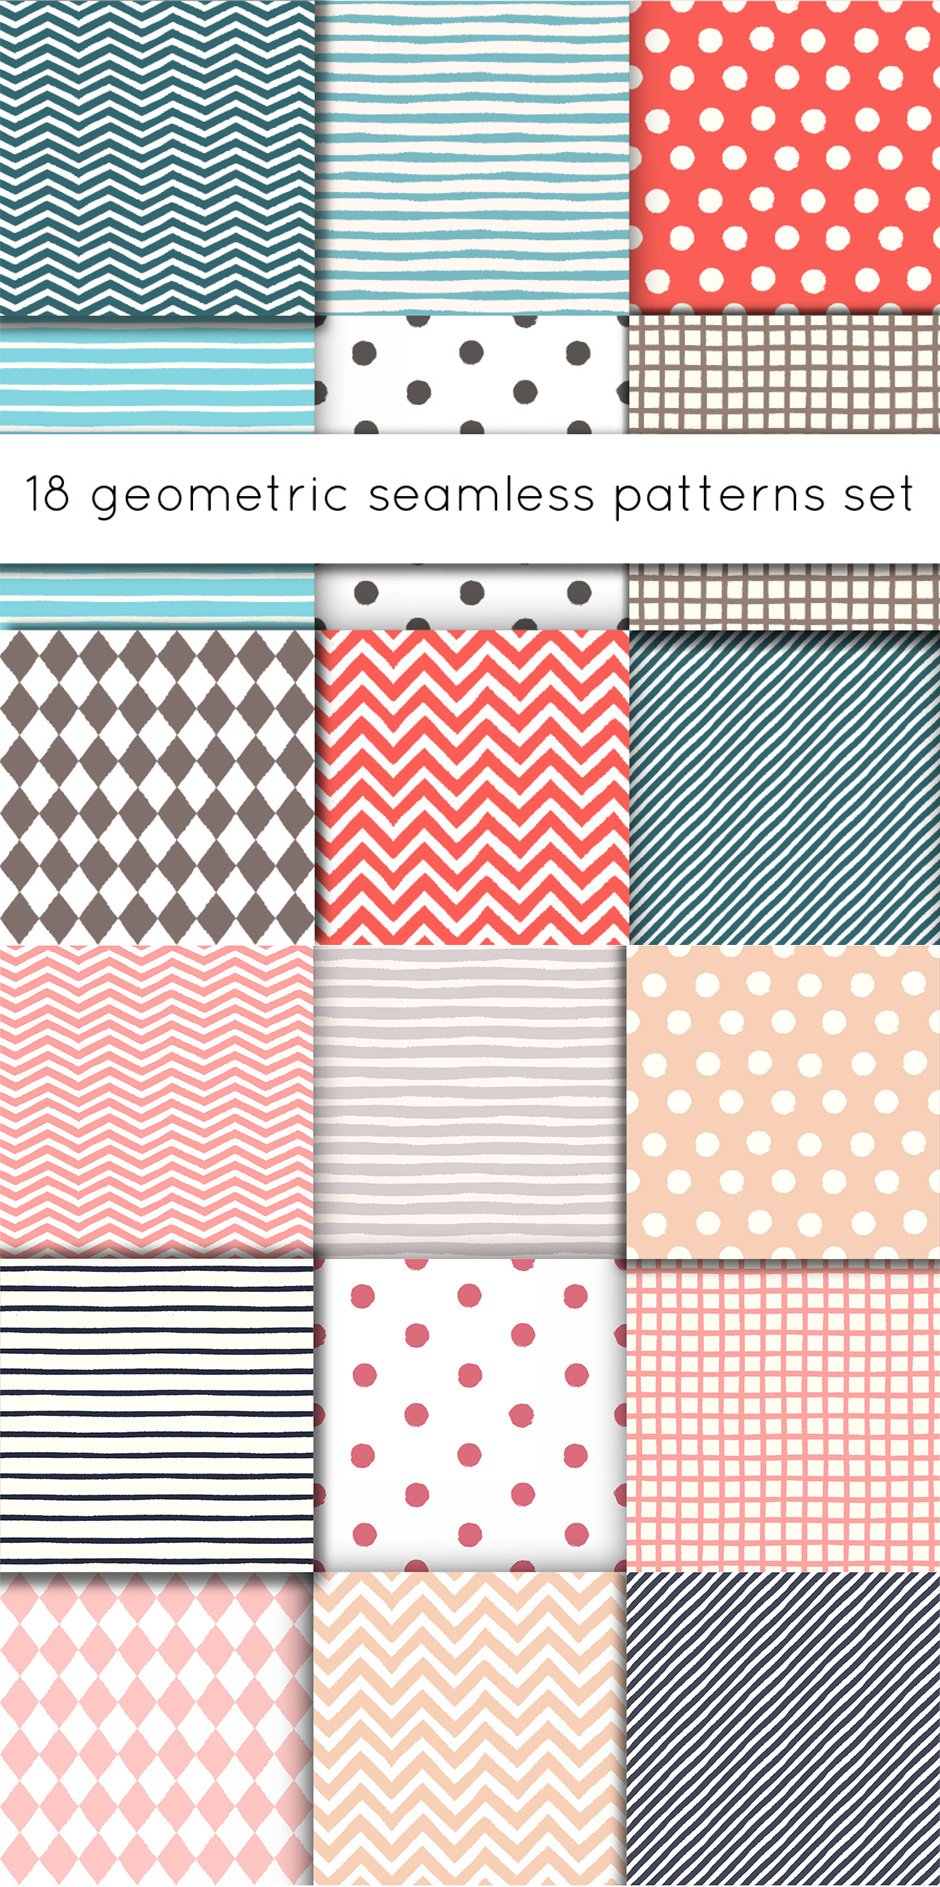 The Colossal Textures and Patterns Bundle